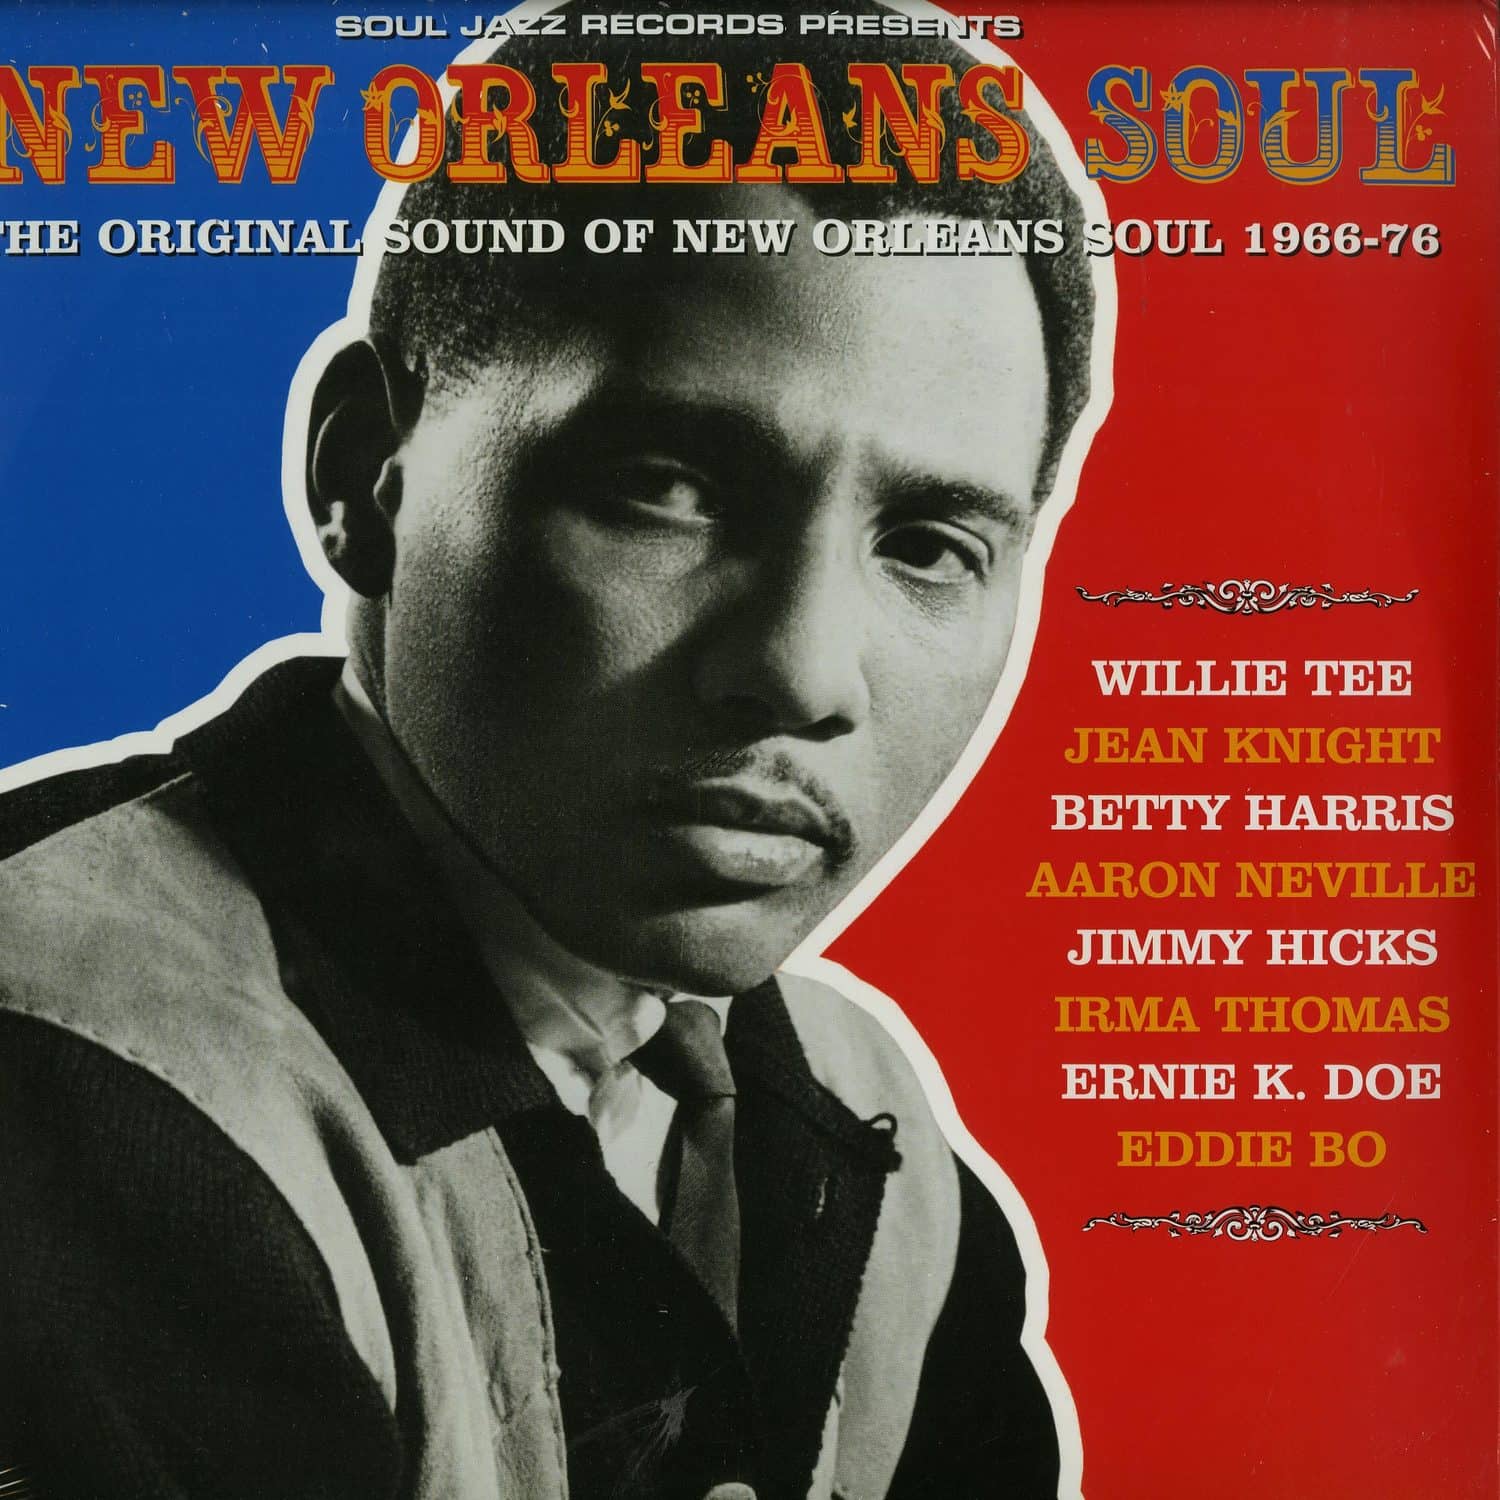 Various Artists - NEW ORLEANS SOUL: THE ORIGINAL SOUND OF NEW ORLEANS SOUL 1966-76 